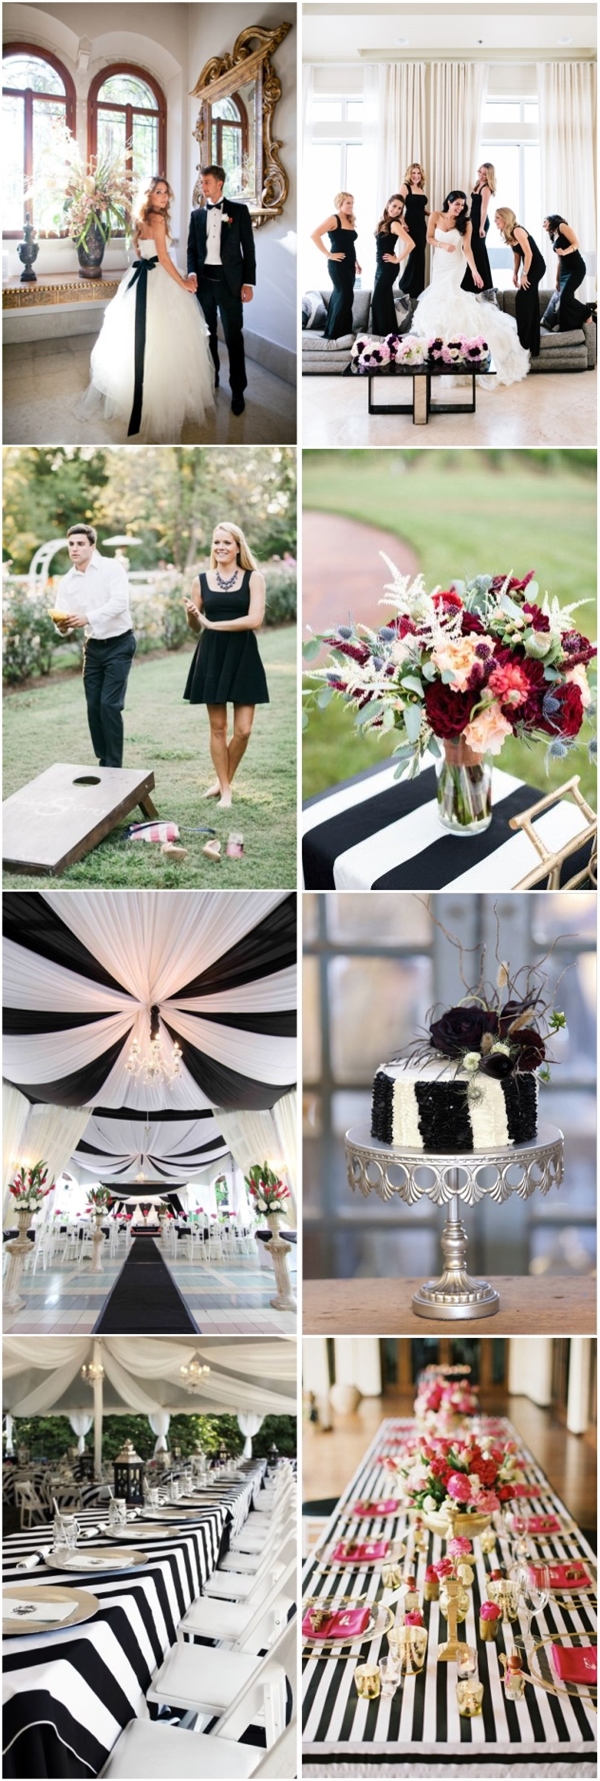 black and white wedding color ideas